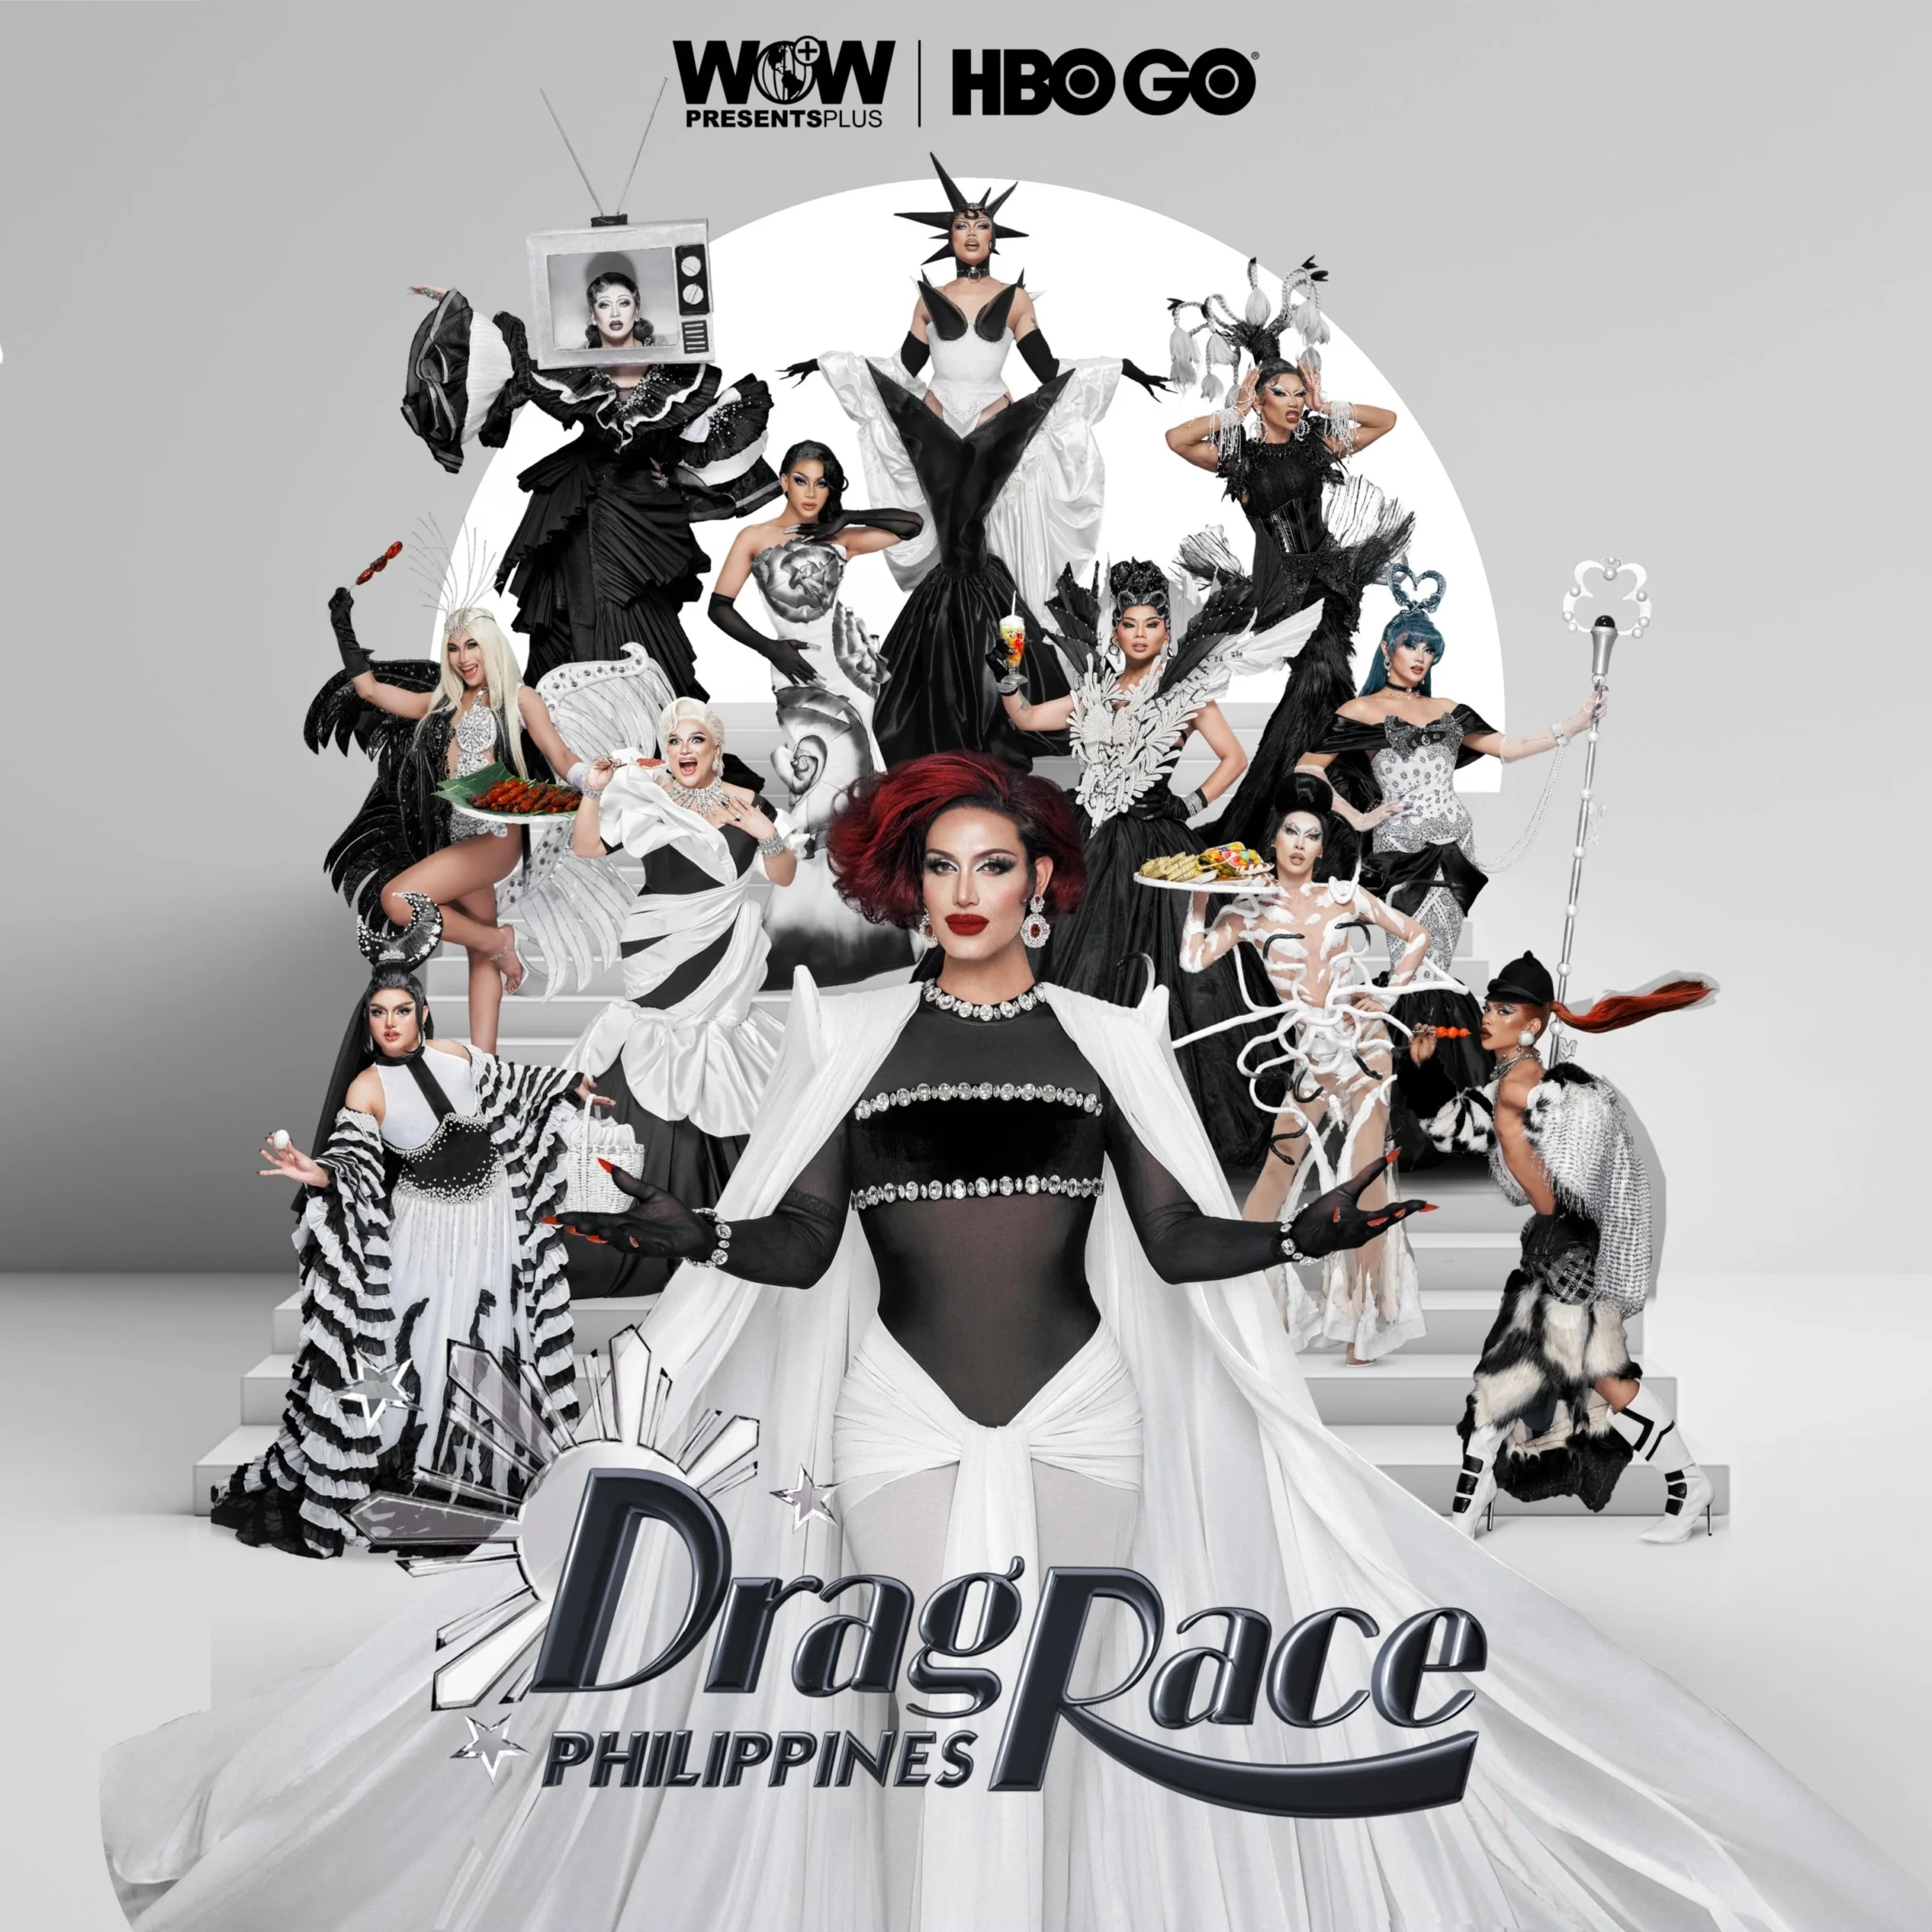 The Official Trailer for Drag Race Philippines Season 3 is Finally Here